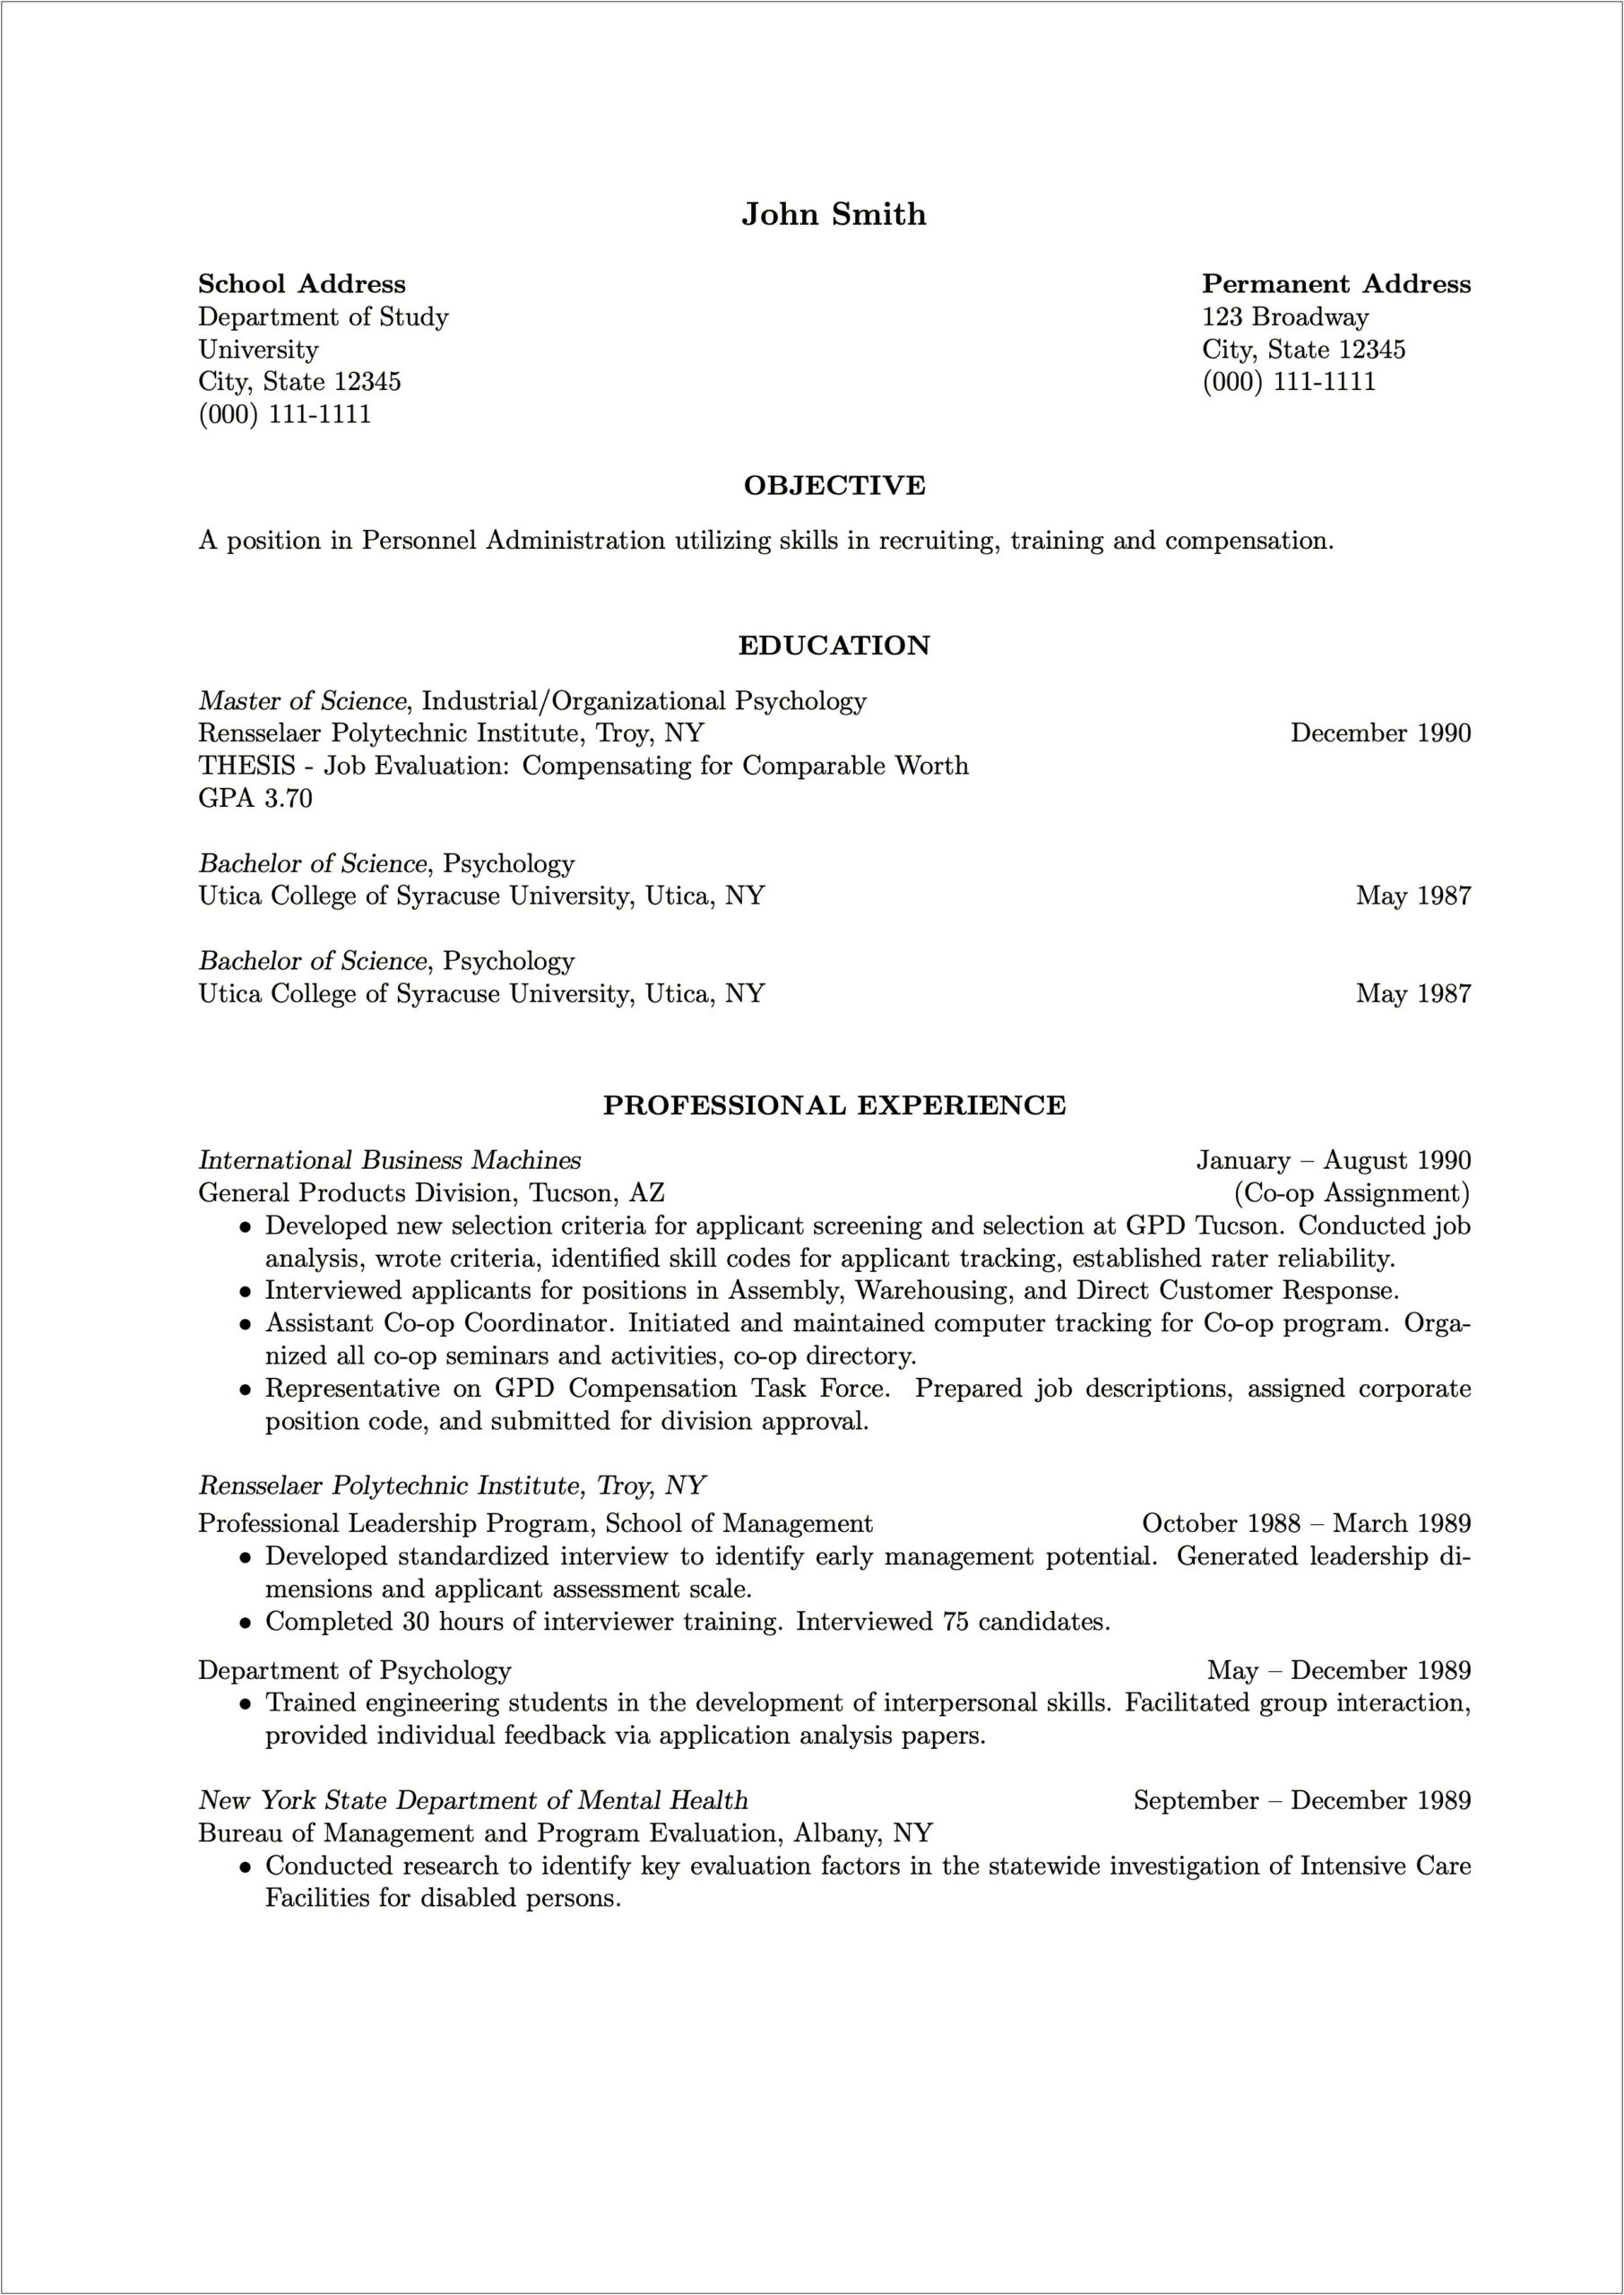 Dual Degrees On Resume 2nd Job Since College